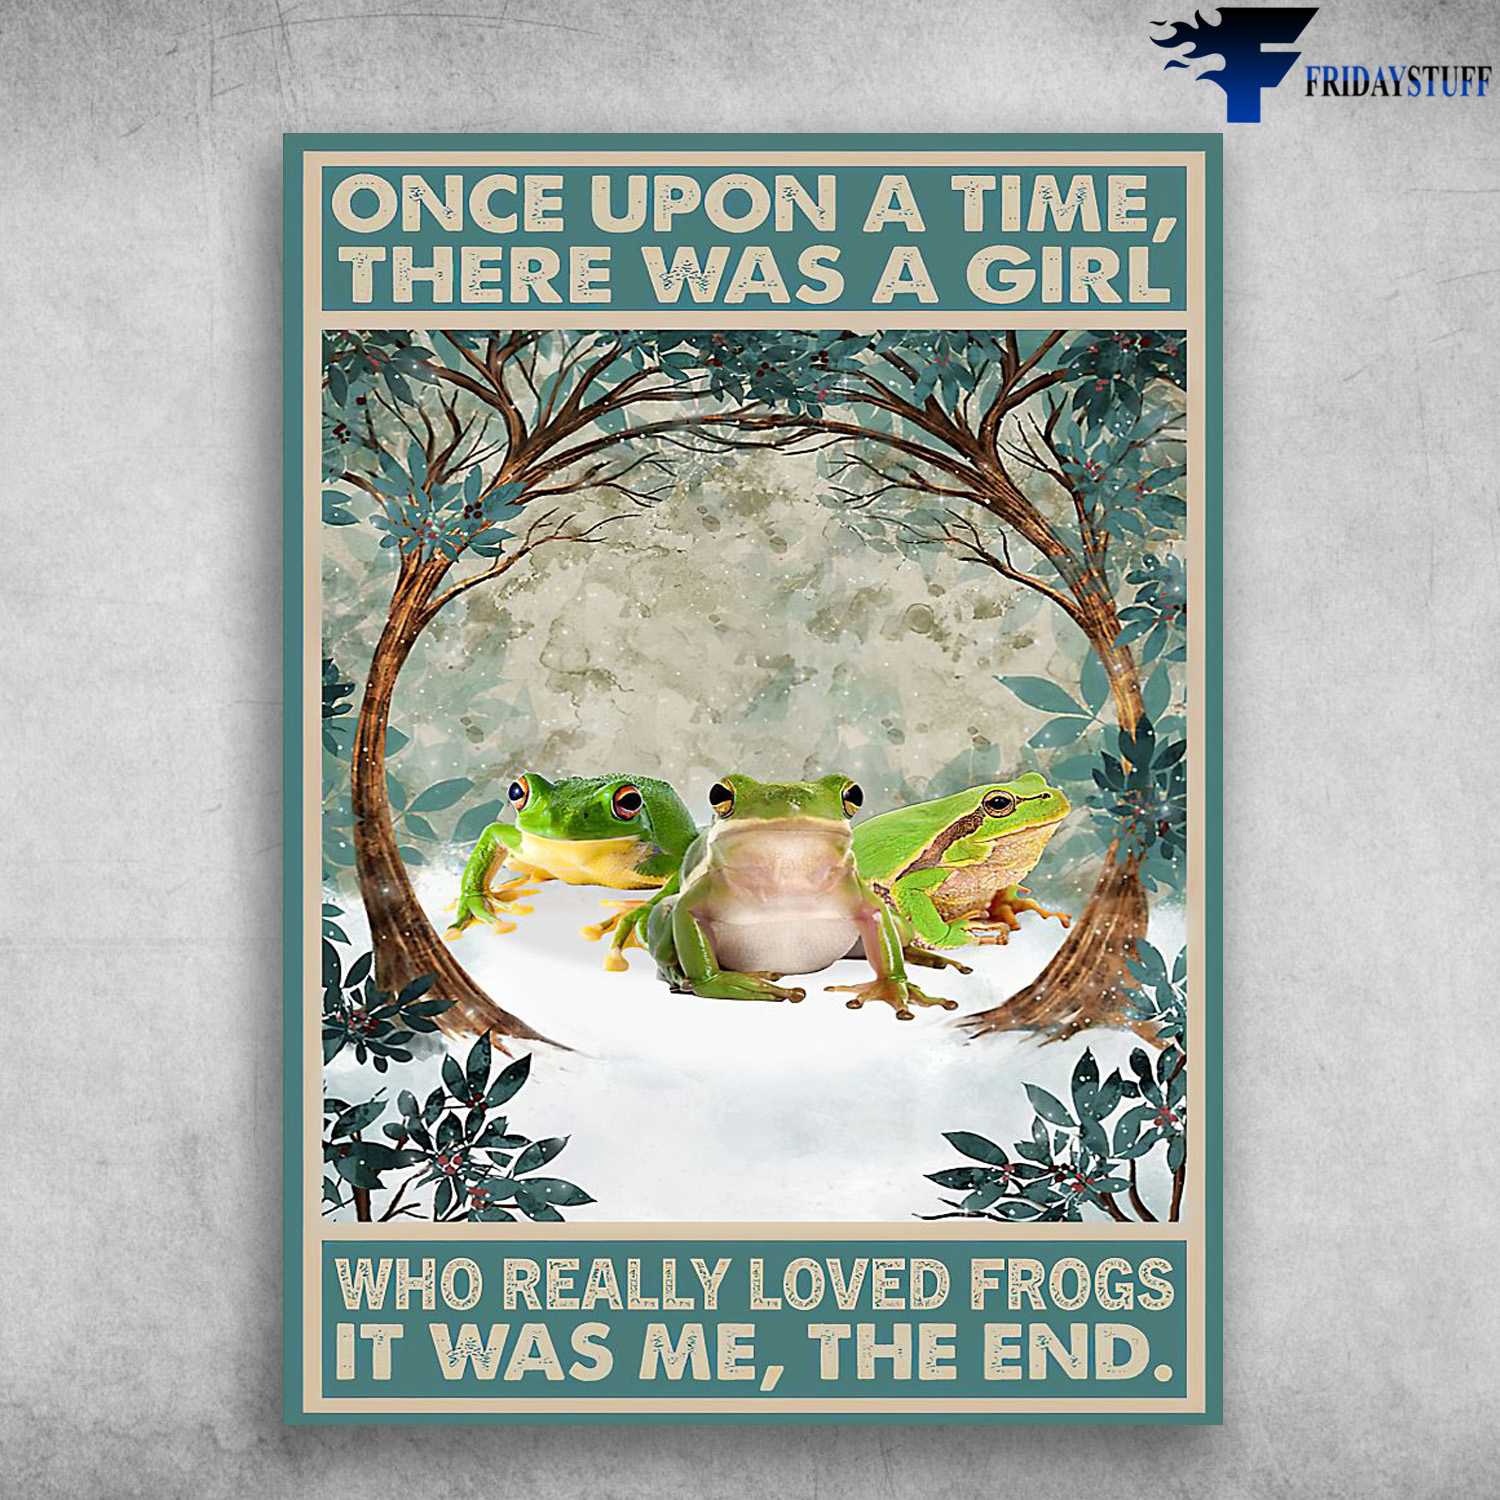 The Three Frog, Frog Poster, Once Upon A Time, There Was A Girl, Who Really Loved Frogs, It Was Me, The End